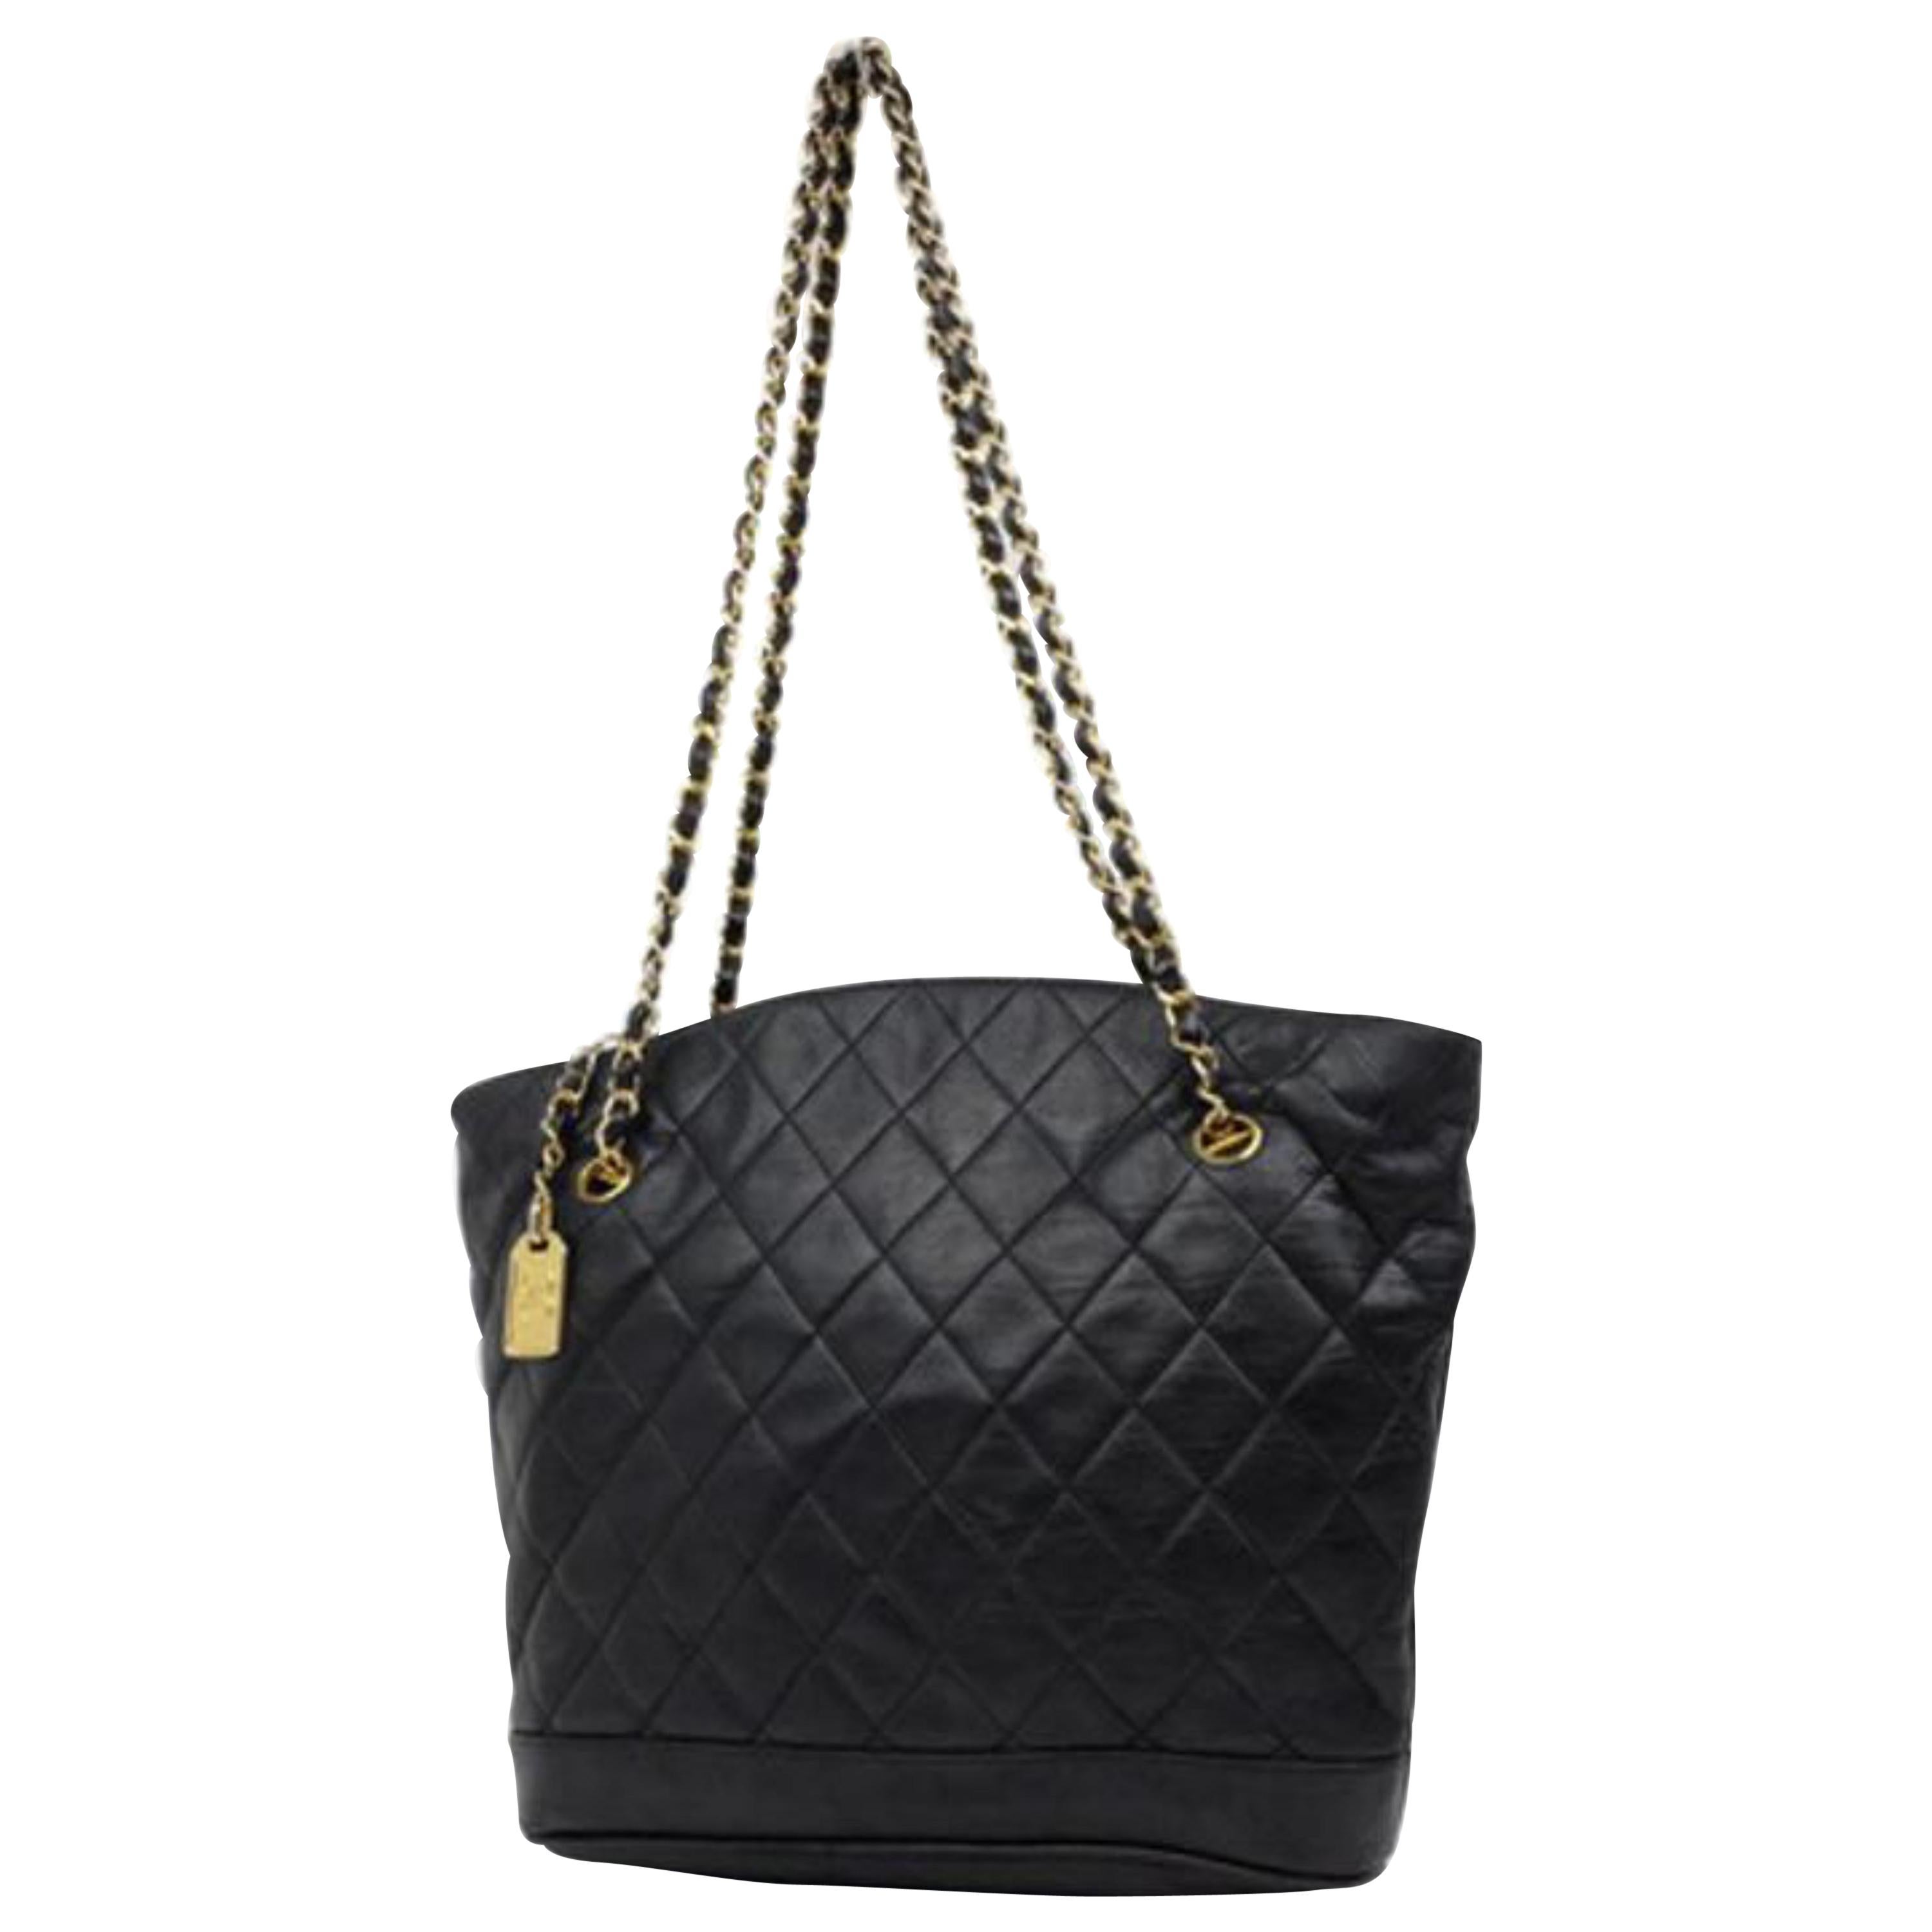 Chanel Quilted Lambskin Chain Tote 221034 Black Leather Shoulder Bag For Sale